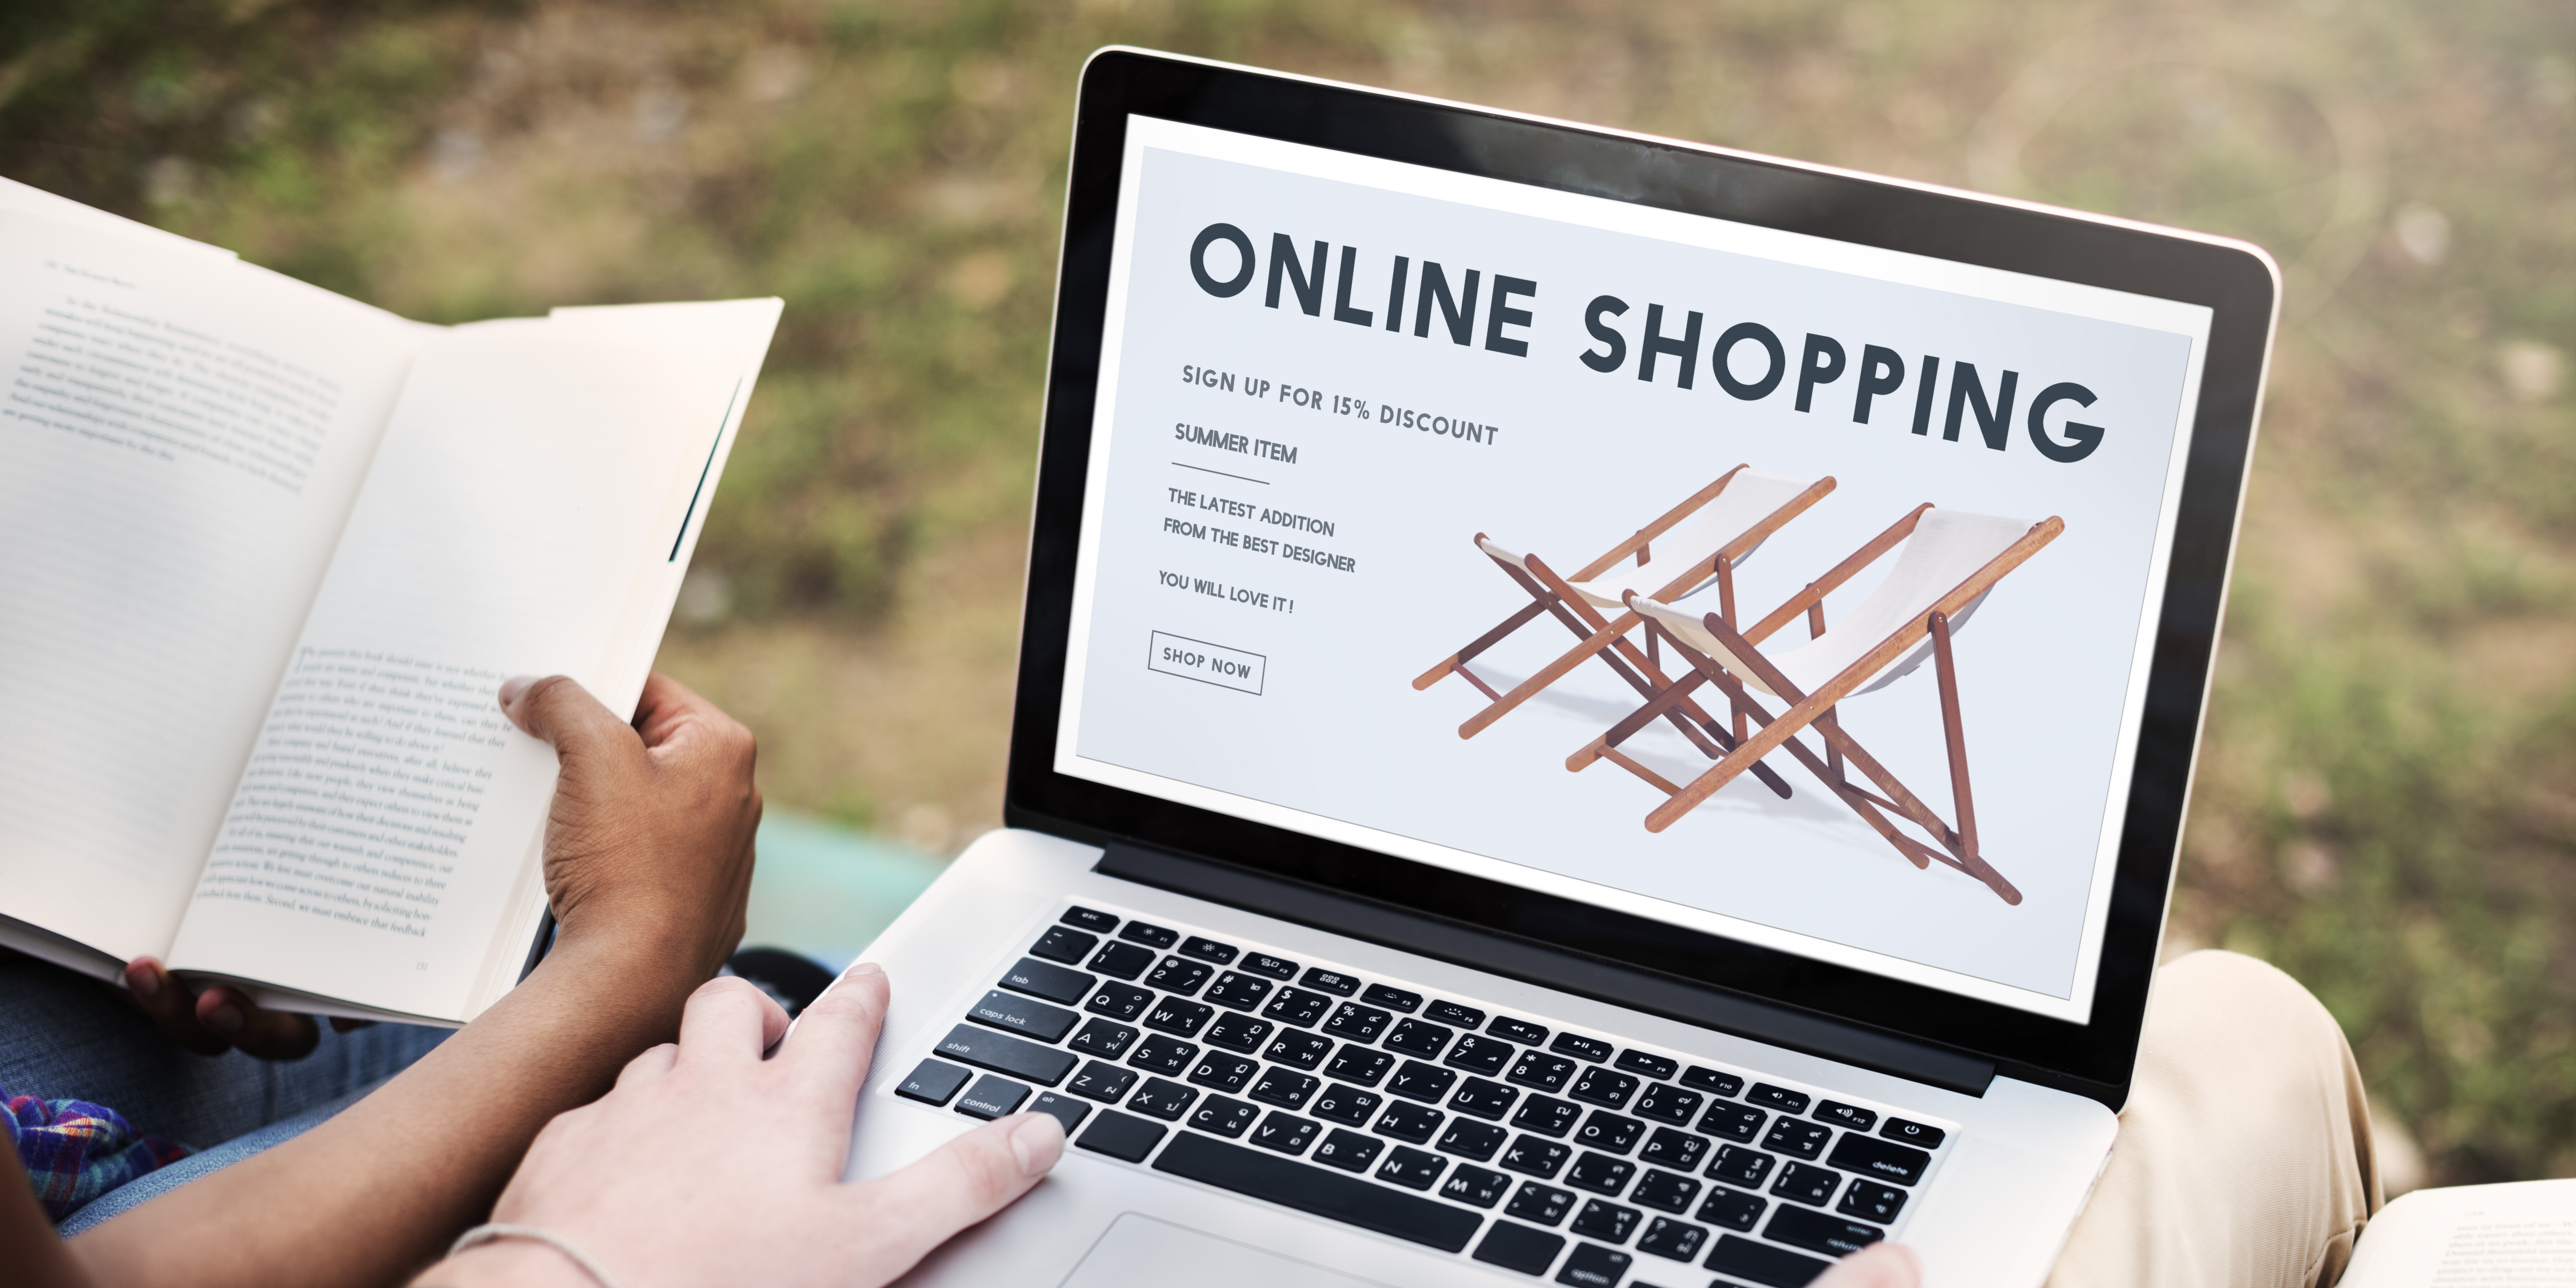 5 Tips to Keep You Safe While Shopping Online